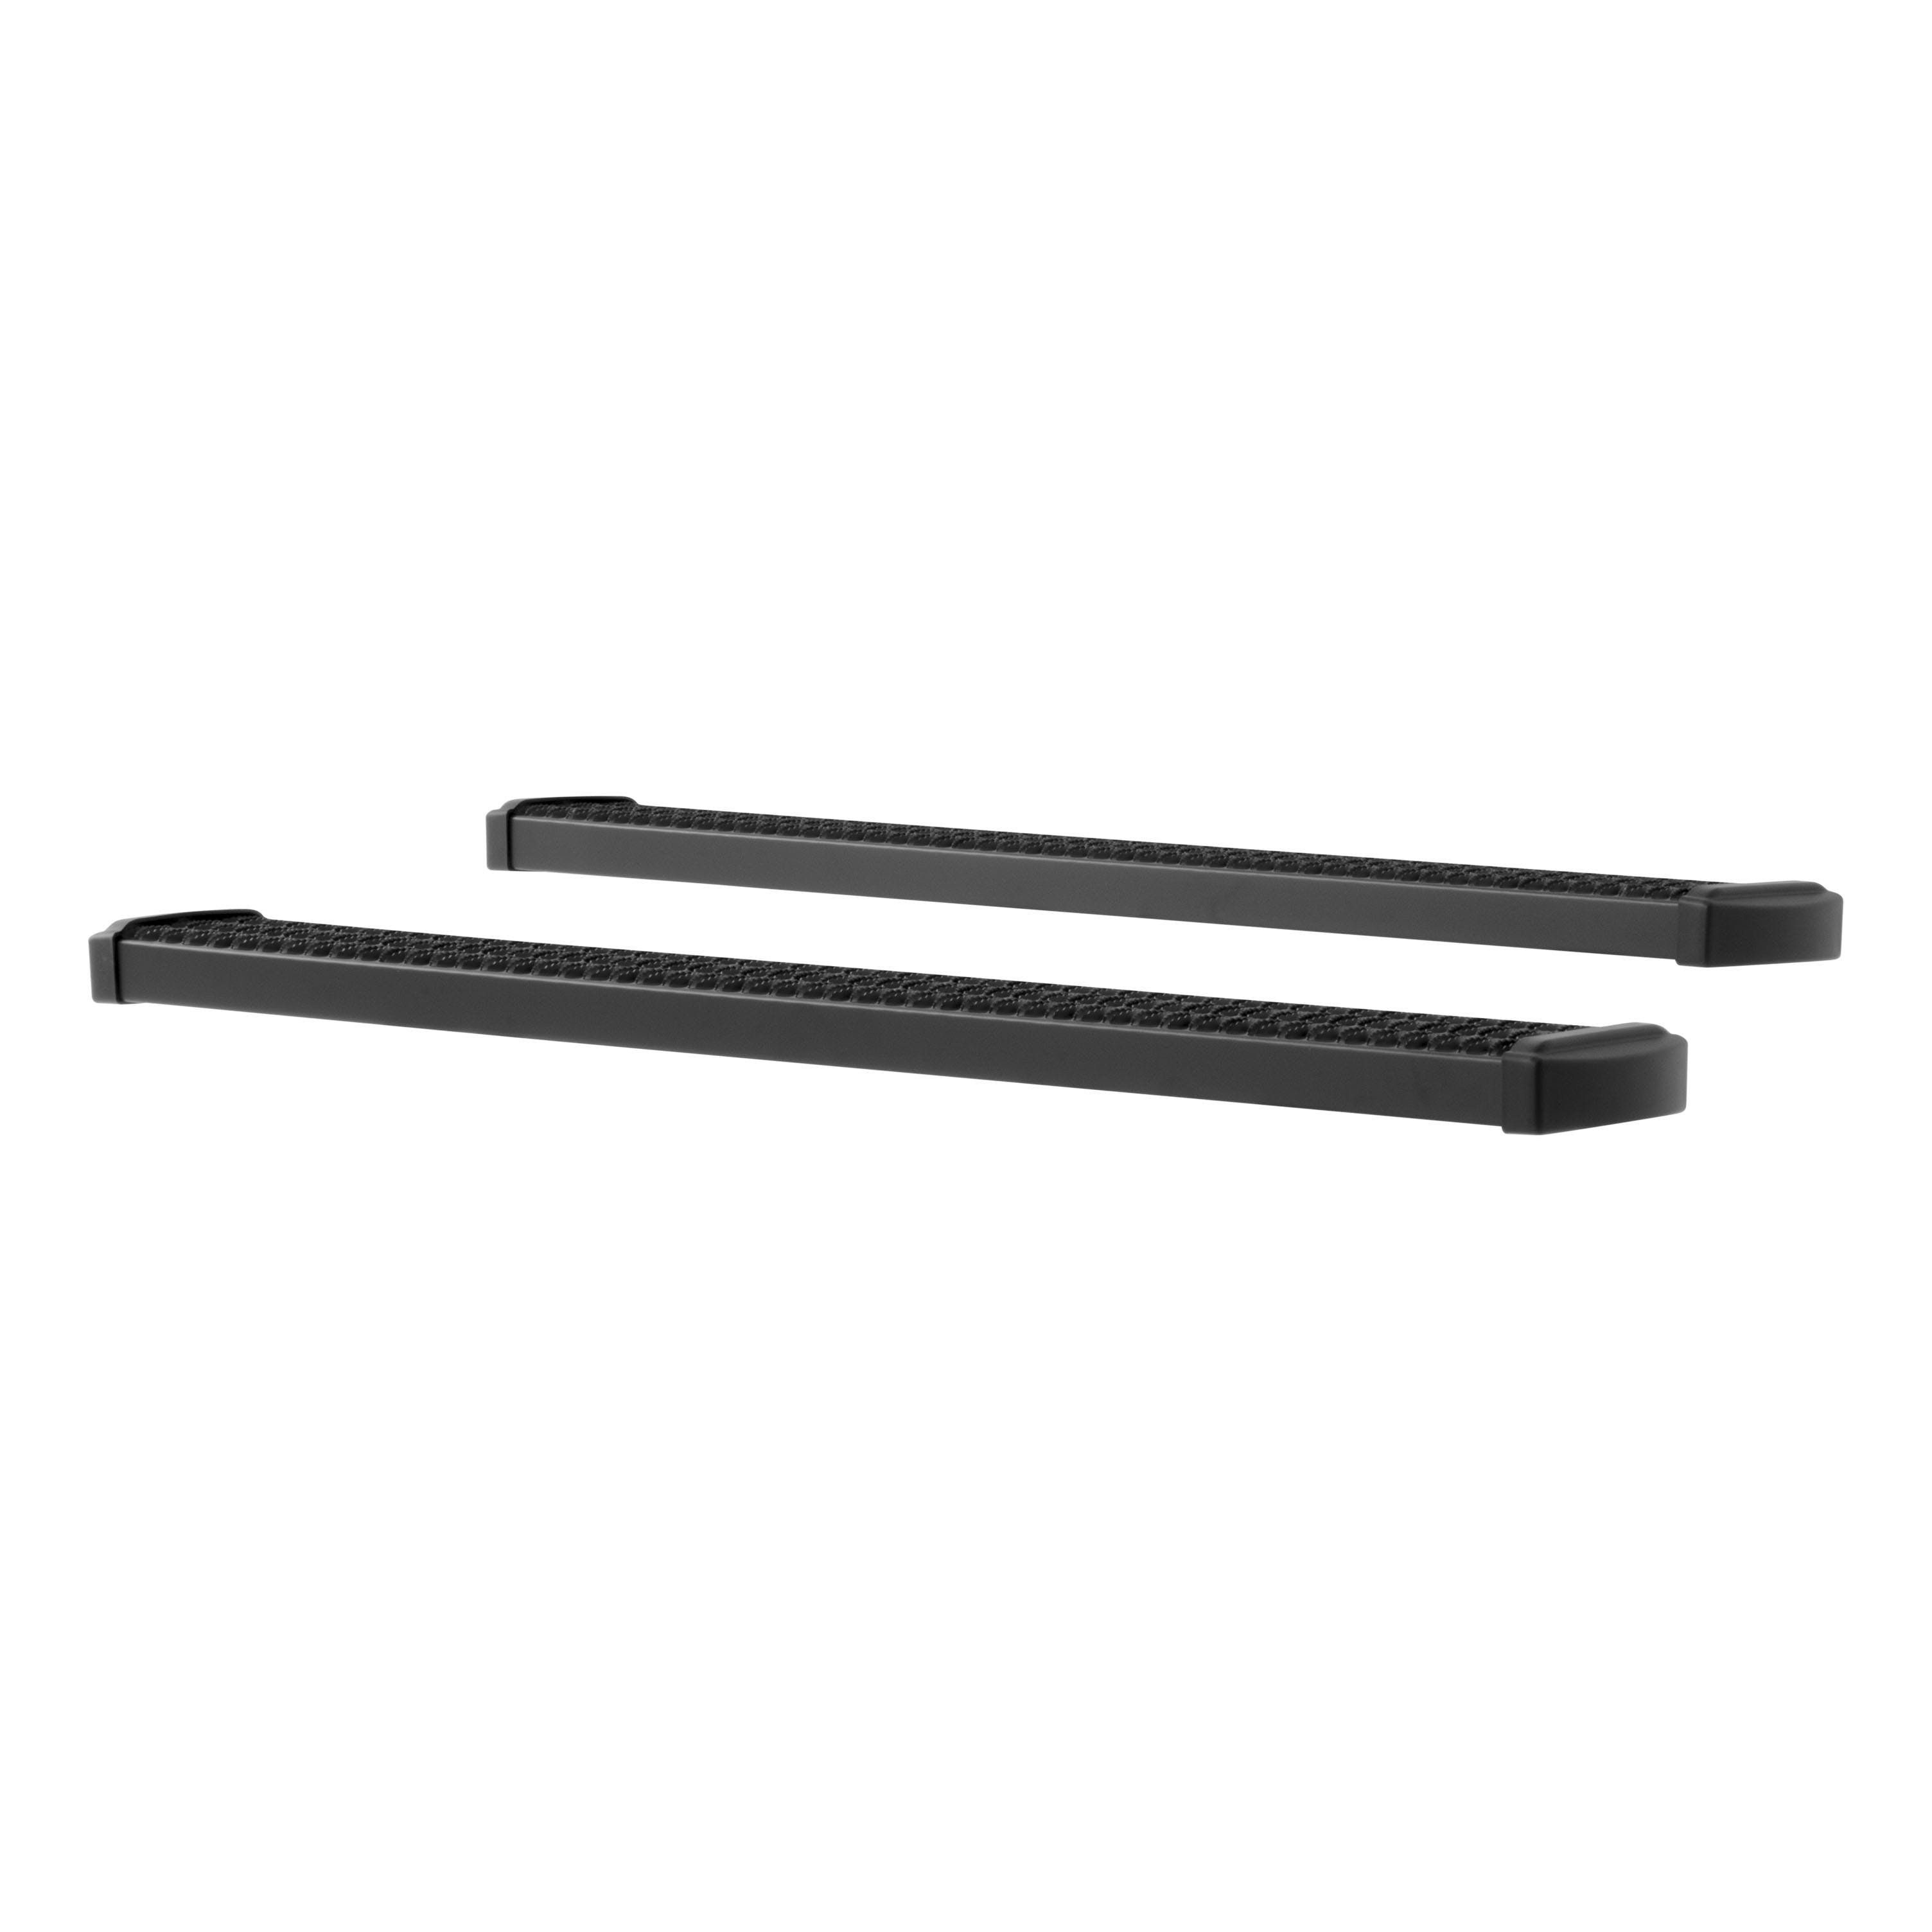 LUVERNE 415060-401521 Grip Step 7 inch Running Boards